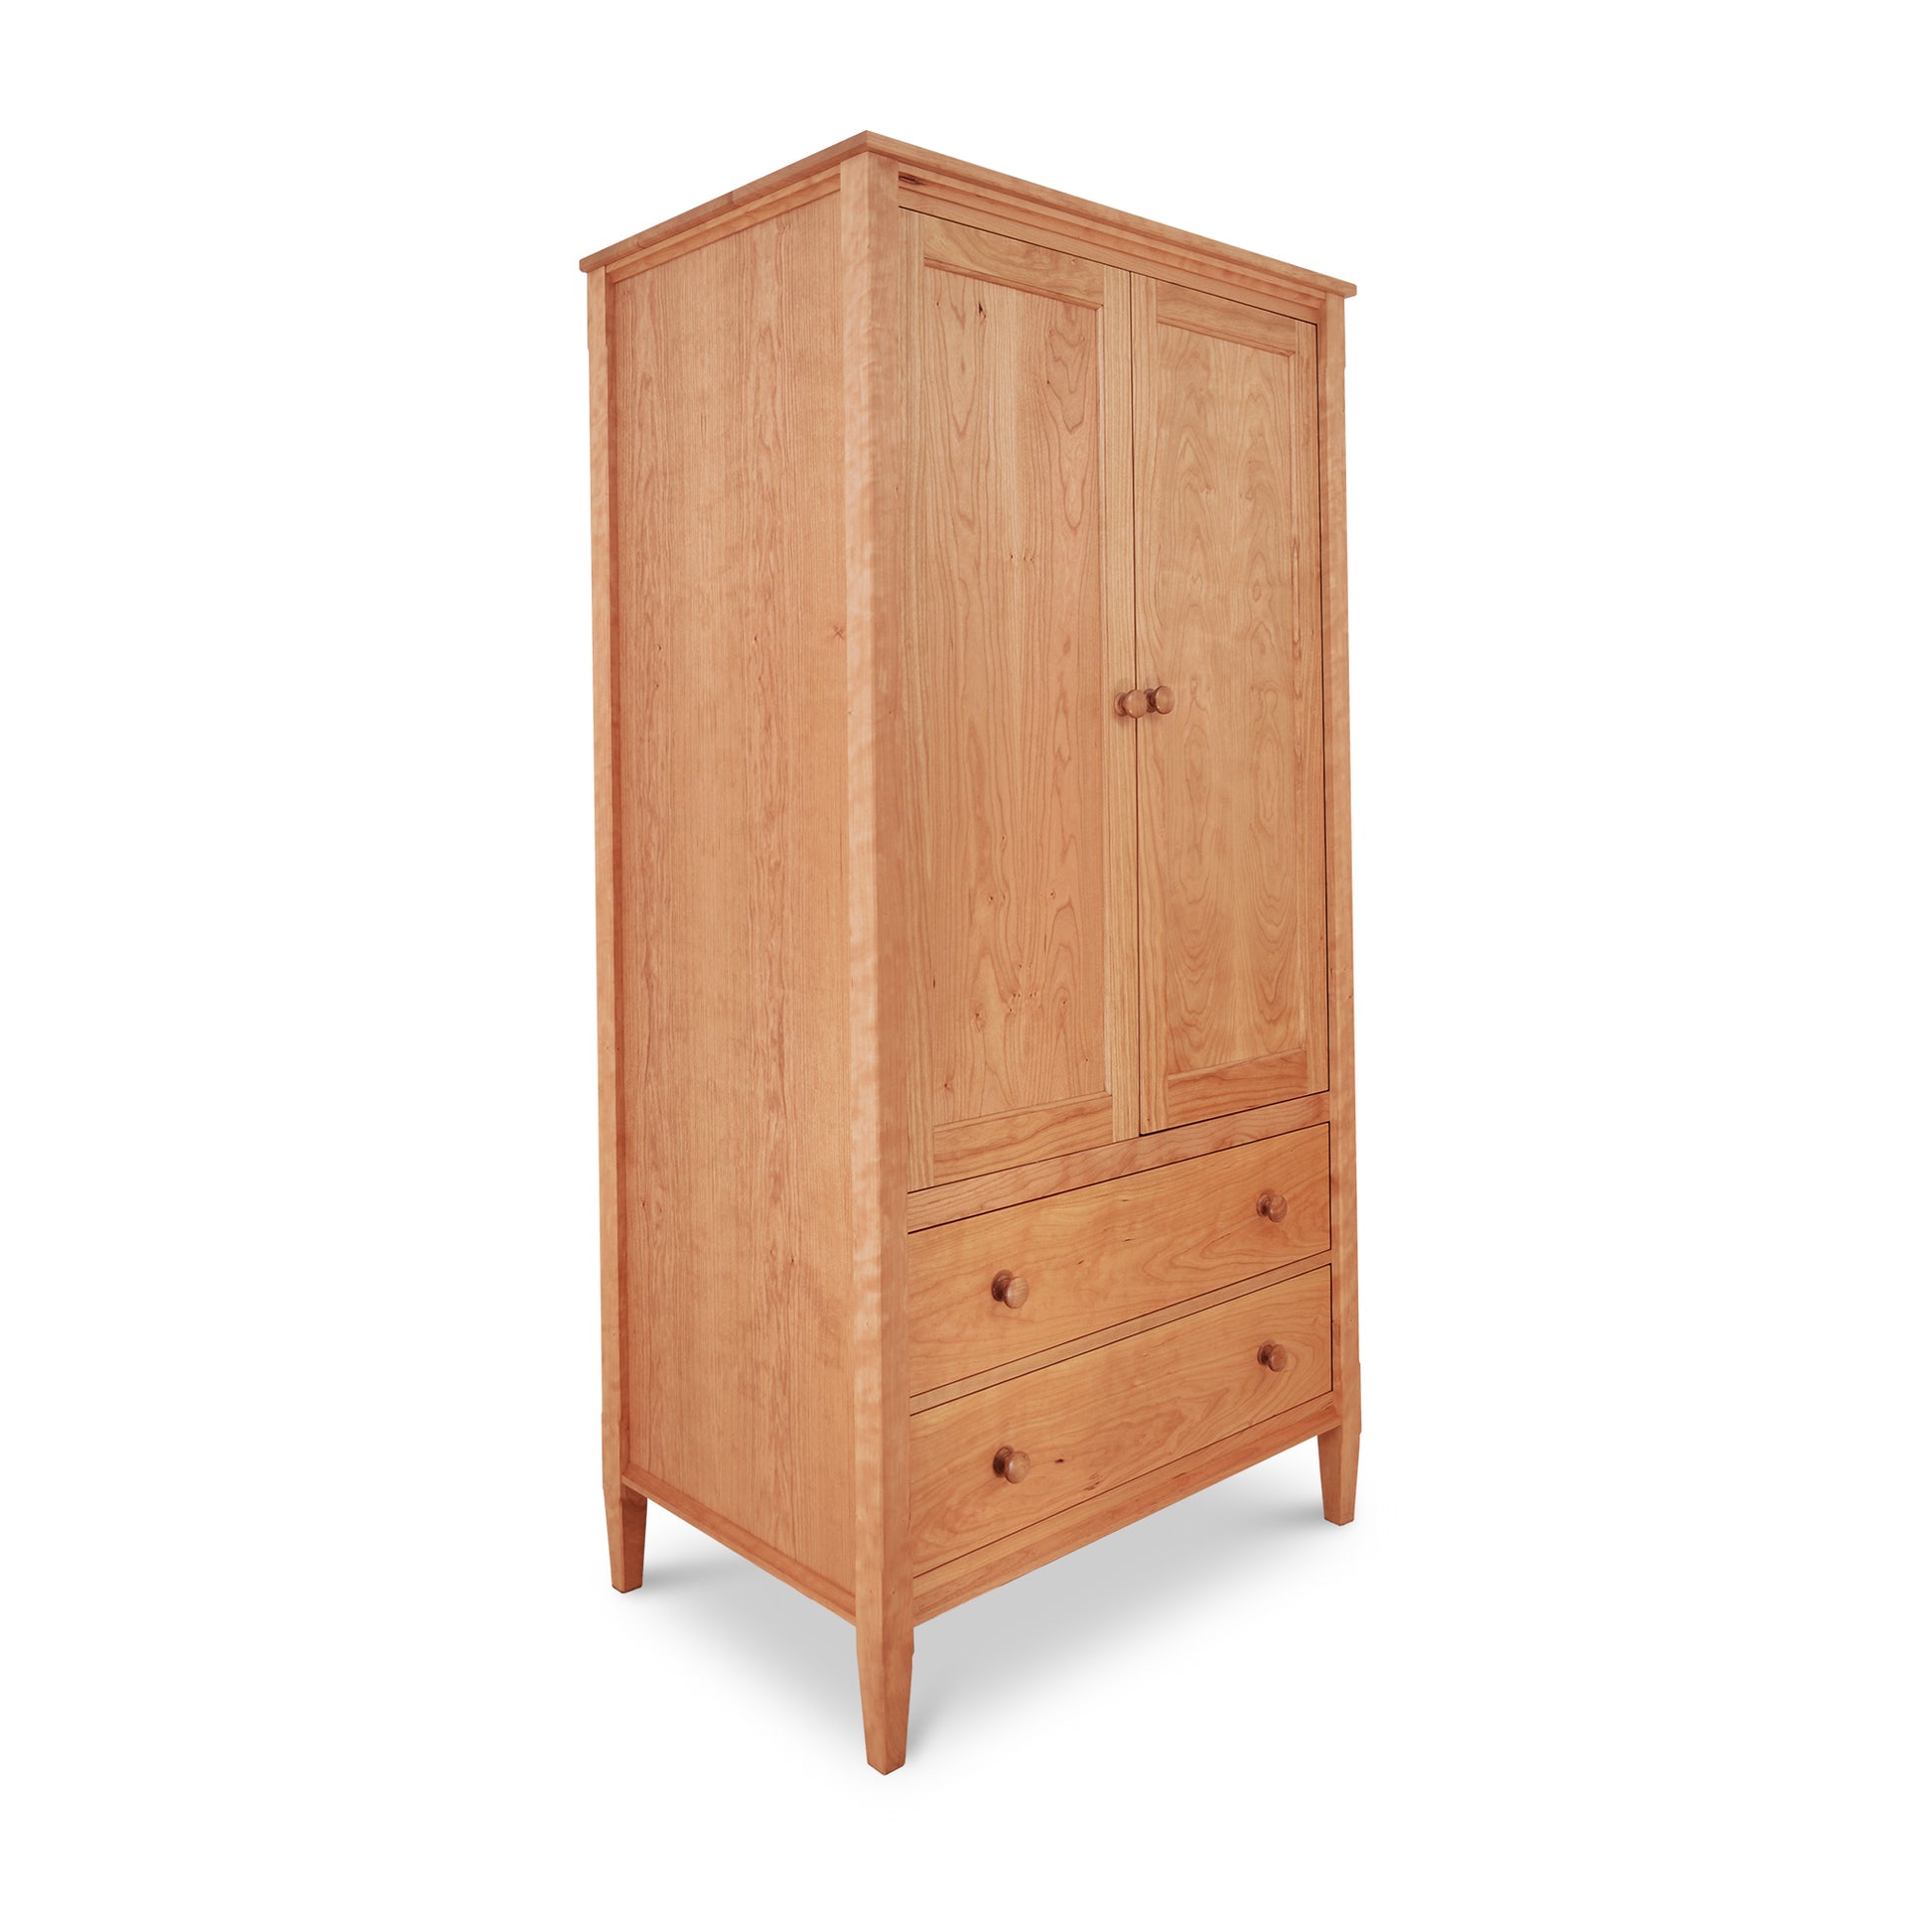 The Maple Corner Woodworks Vermont Shaker Armoire is a heirloom piece with solid wood construction and two drawers.